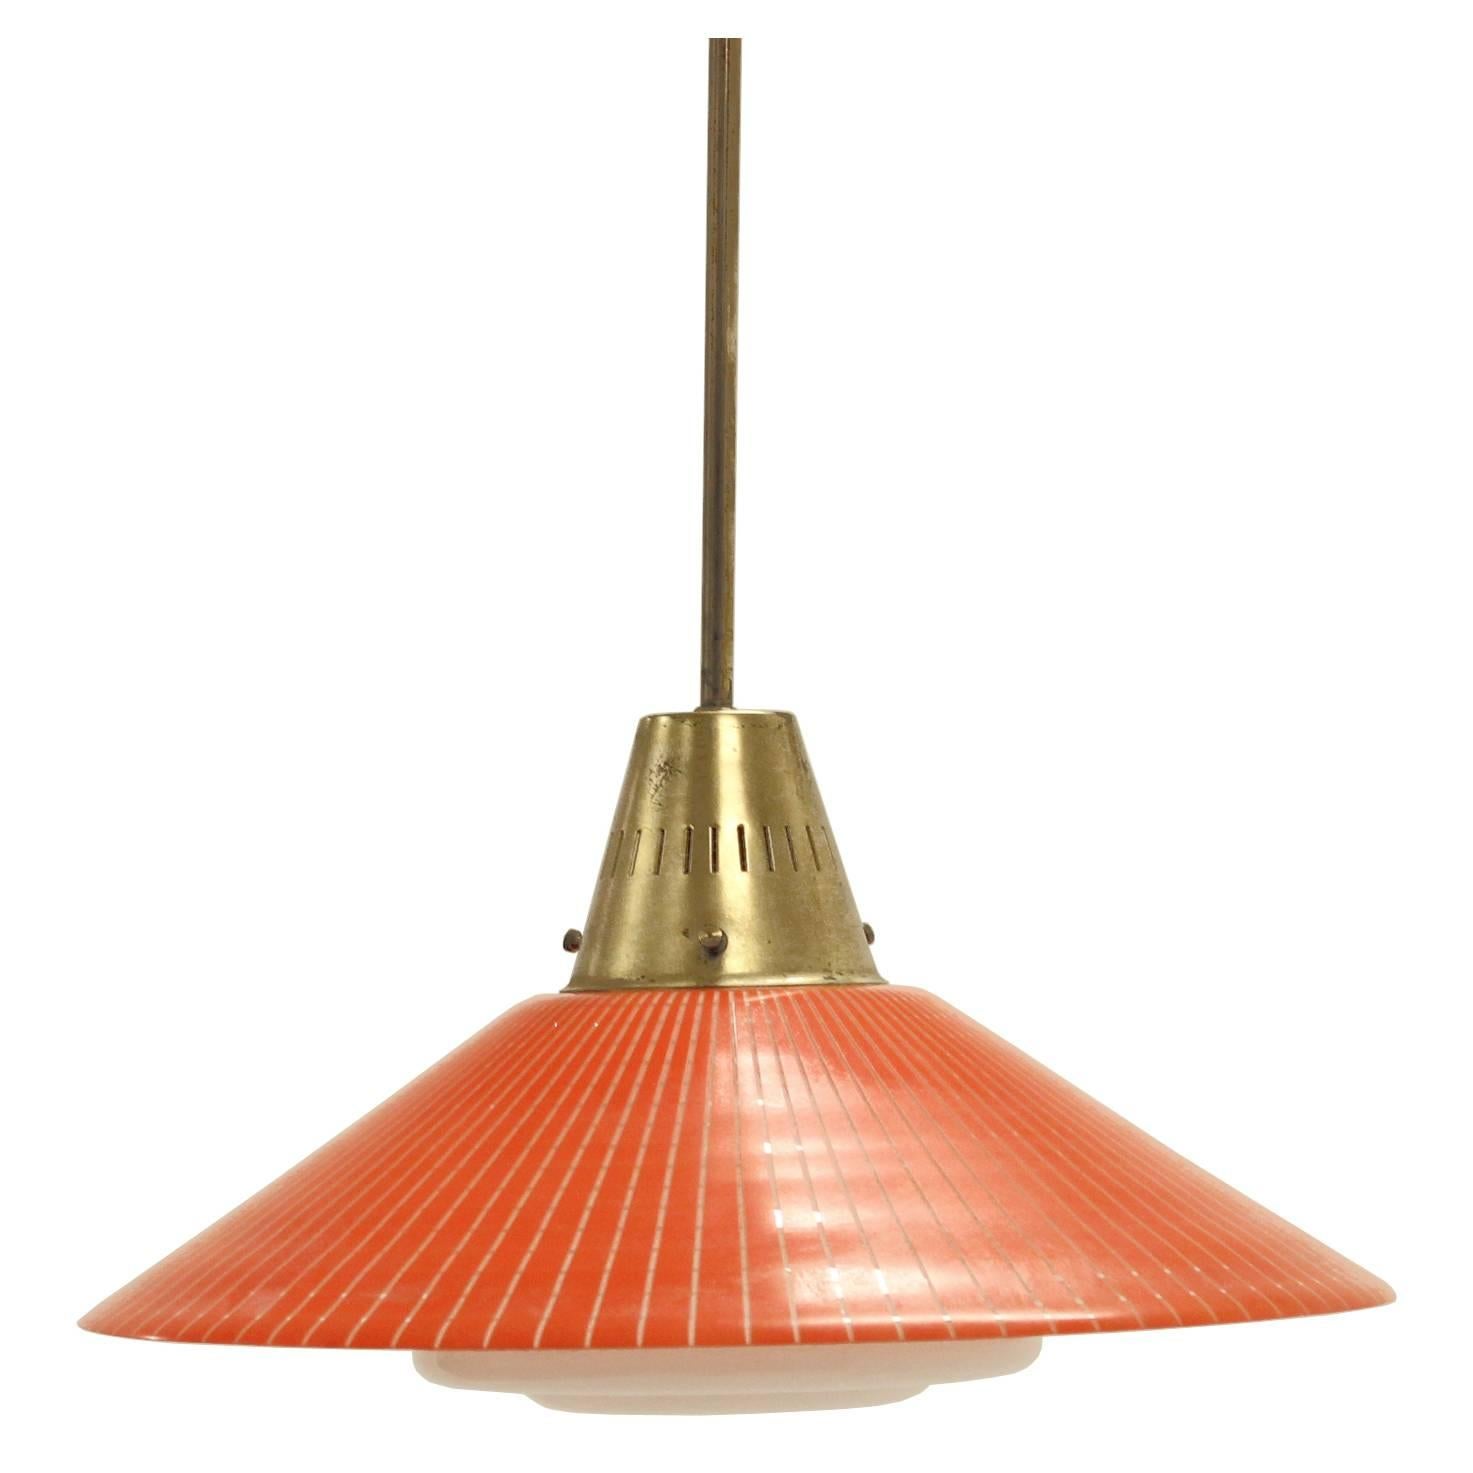 Scandinavian Mid-Century Ceiling Light by Tr & Co, Norway, 1960s